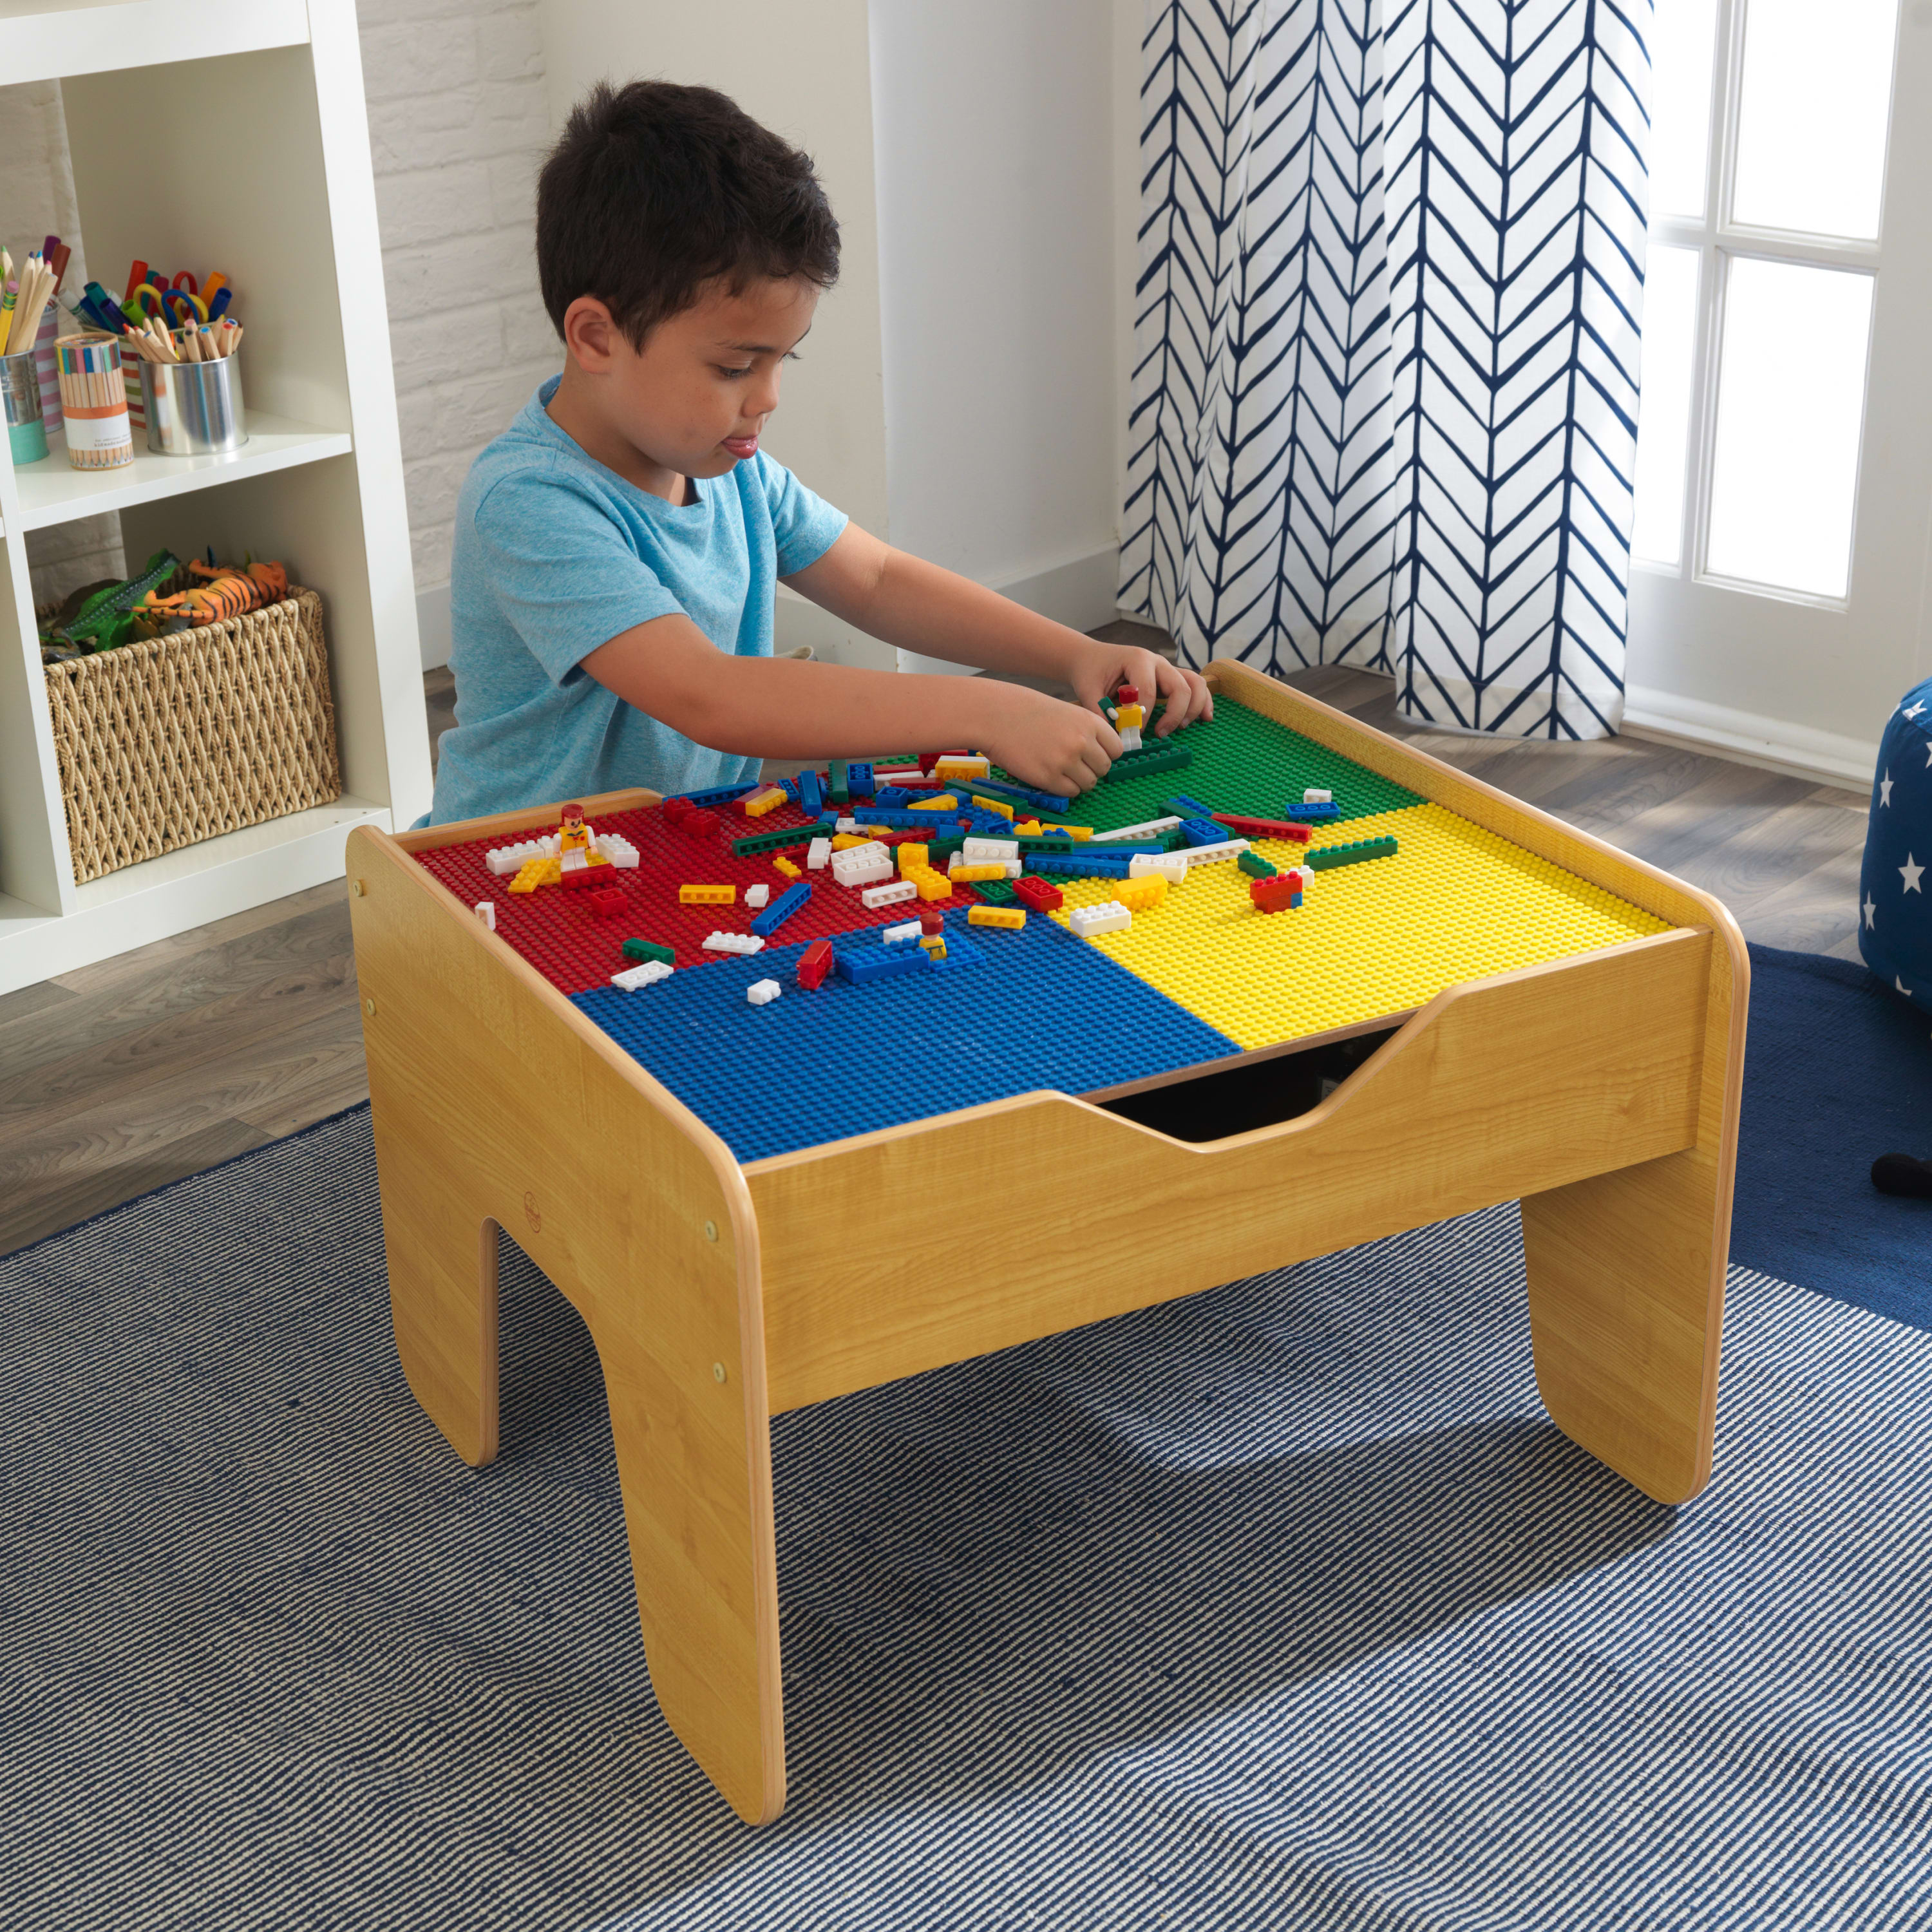 KidKraft Reversible Wooden Activity Table with Board and Train Set, Natural, for Ages 3+ Years - image 3 of 11